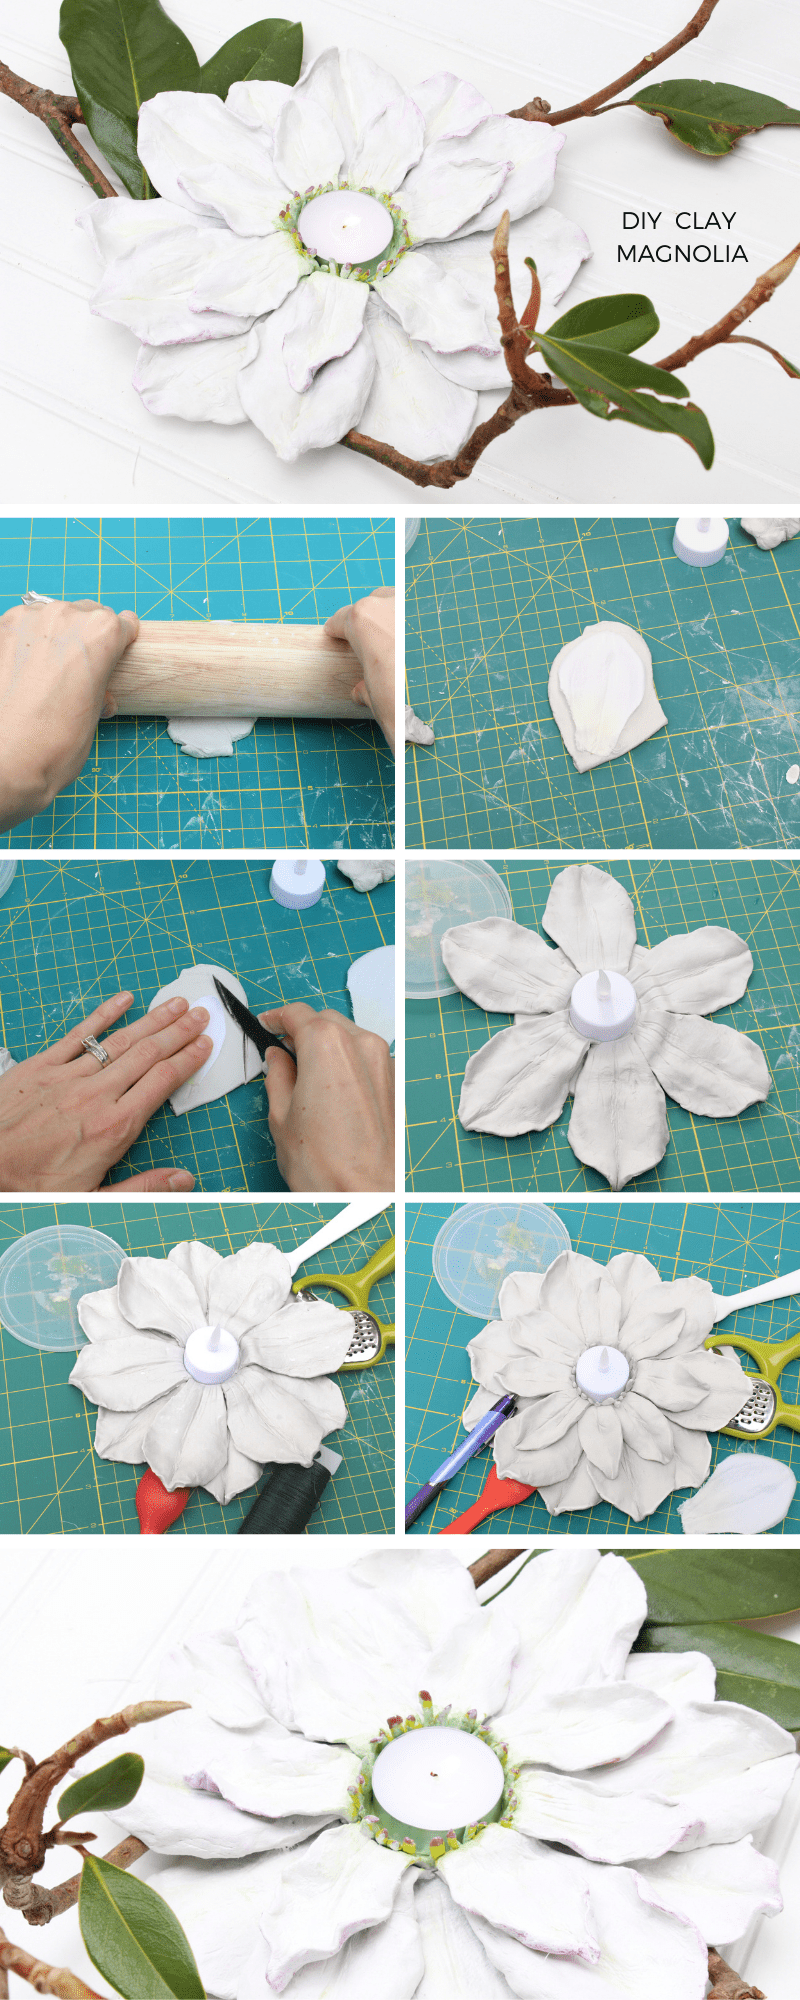 Three ways to incorporate polymer and air dry clay into your holiday home decor, including a magnolia votive holder tutorial. DIY Baby handprint ornament and kid's name ornament. #DIYChristmasDecorations #Christmasmantel #christmasdecor #magnoliaflowerdecor #magnoliacenterpiece #magnoliaflowerdecorideas